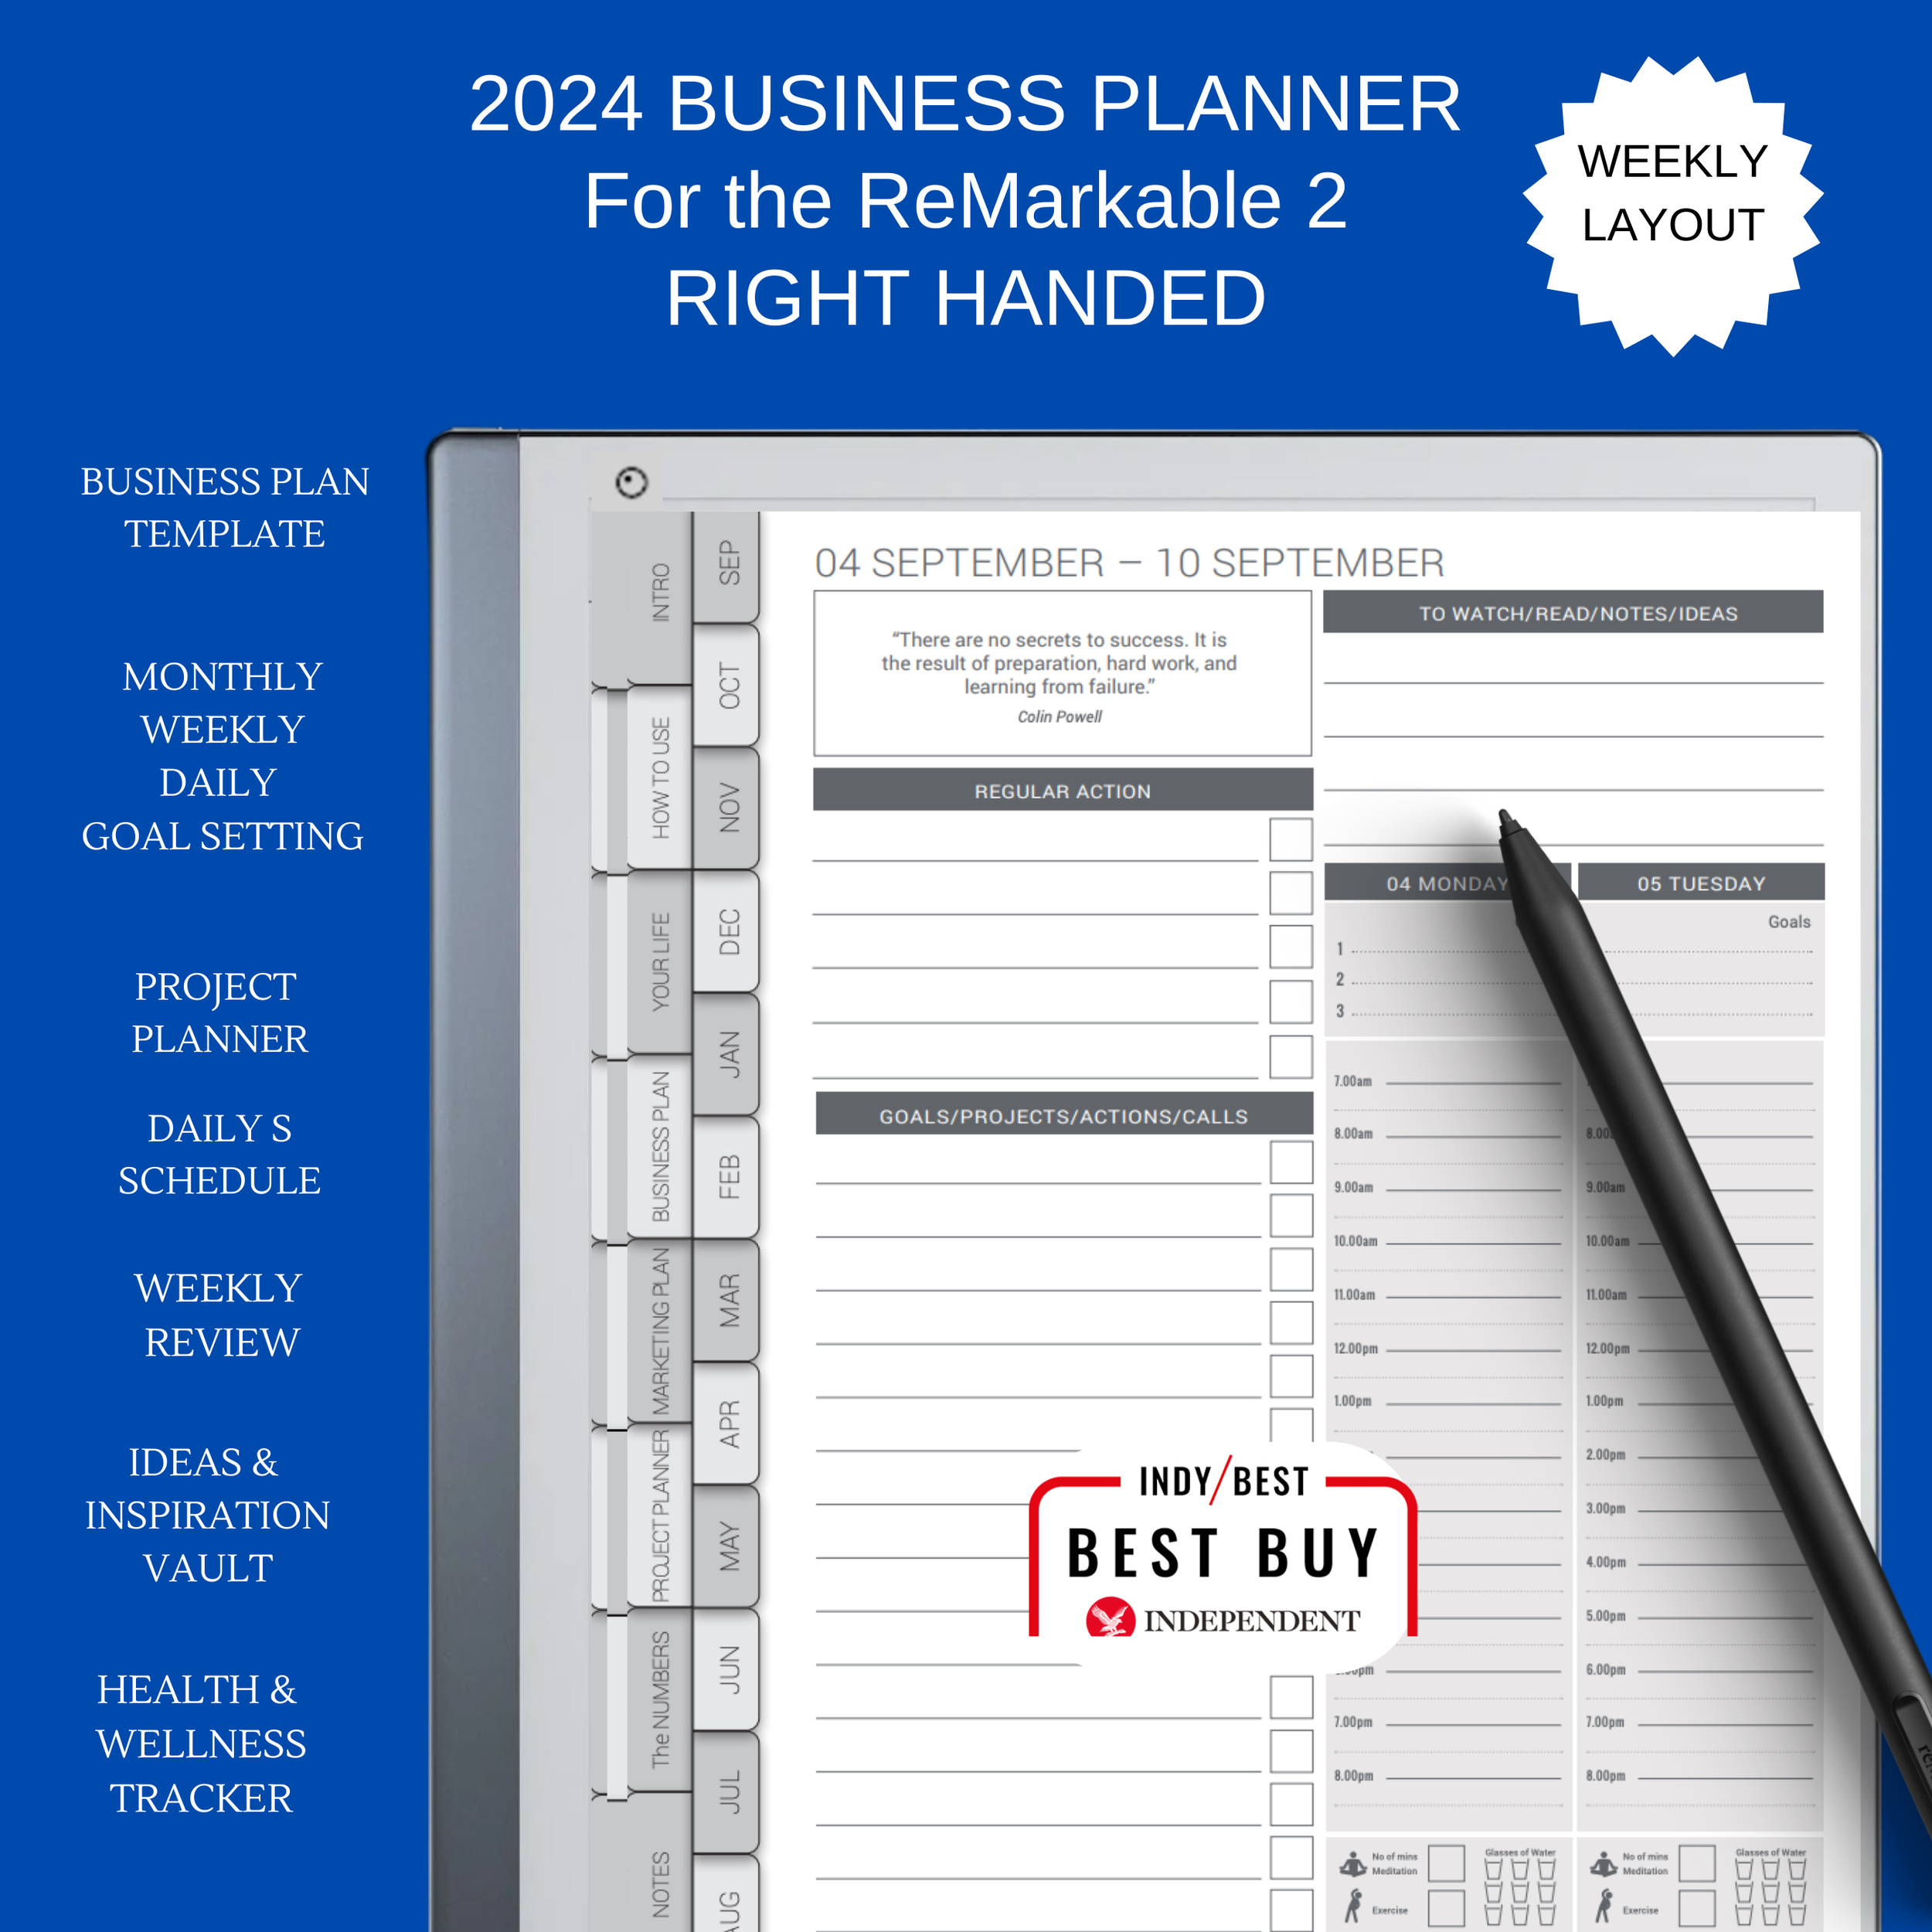 2024 Weekly Day Planner